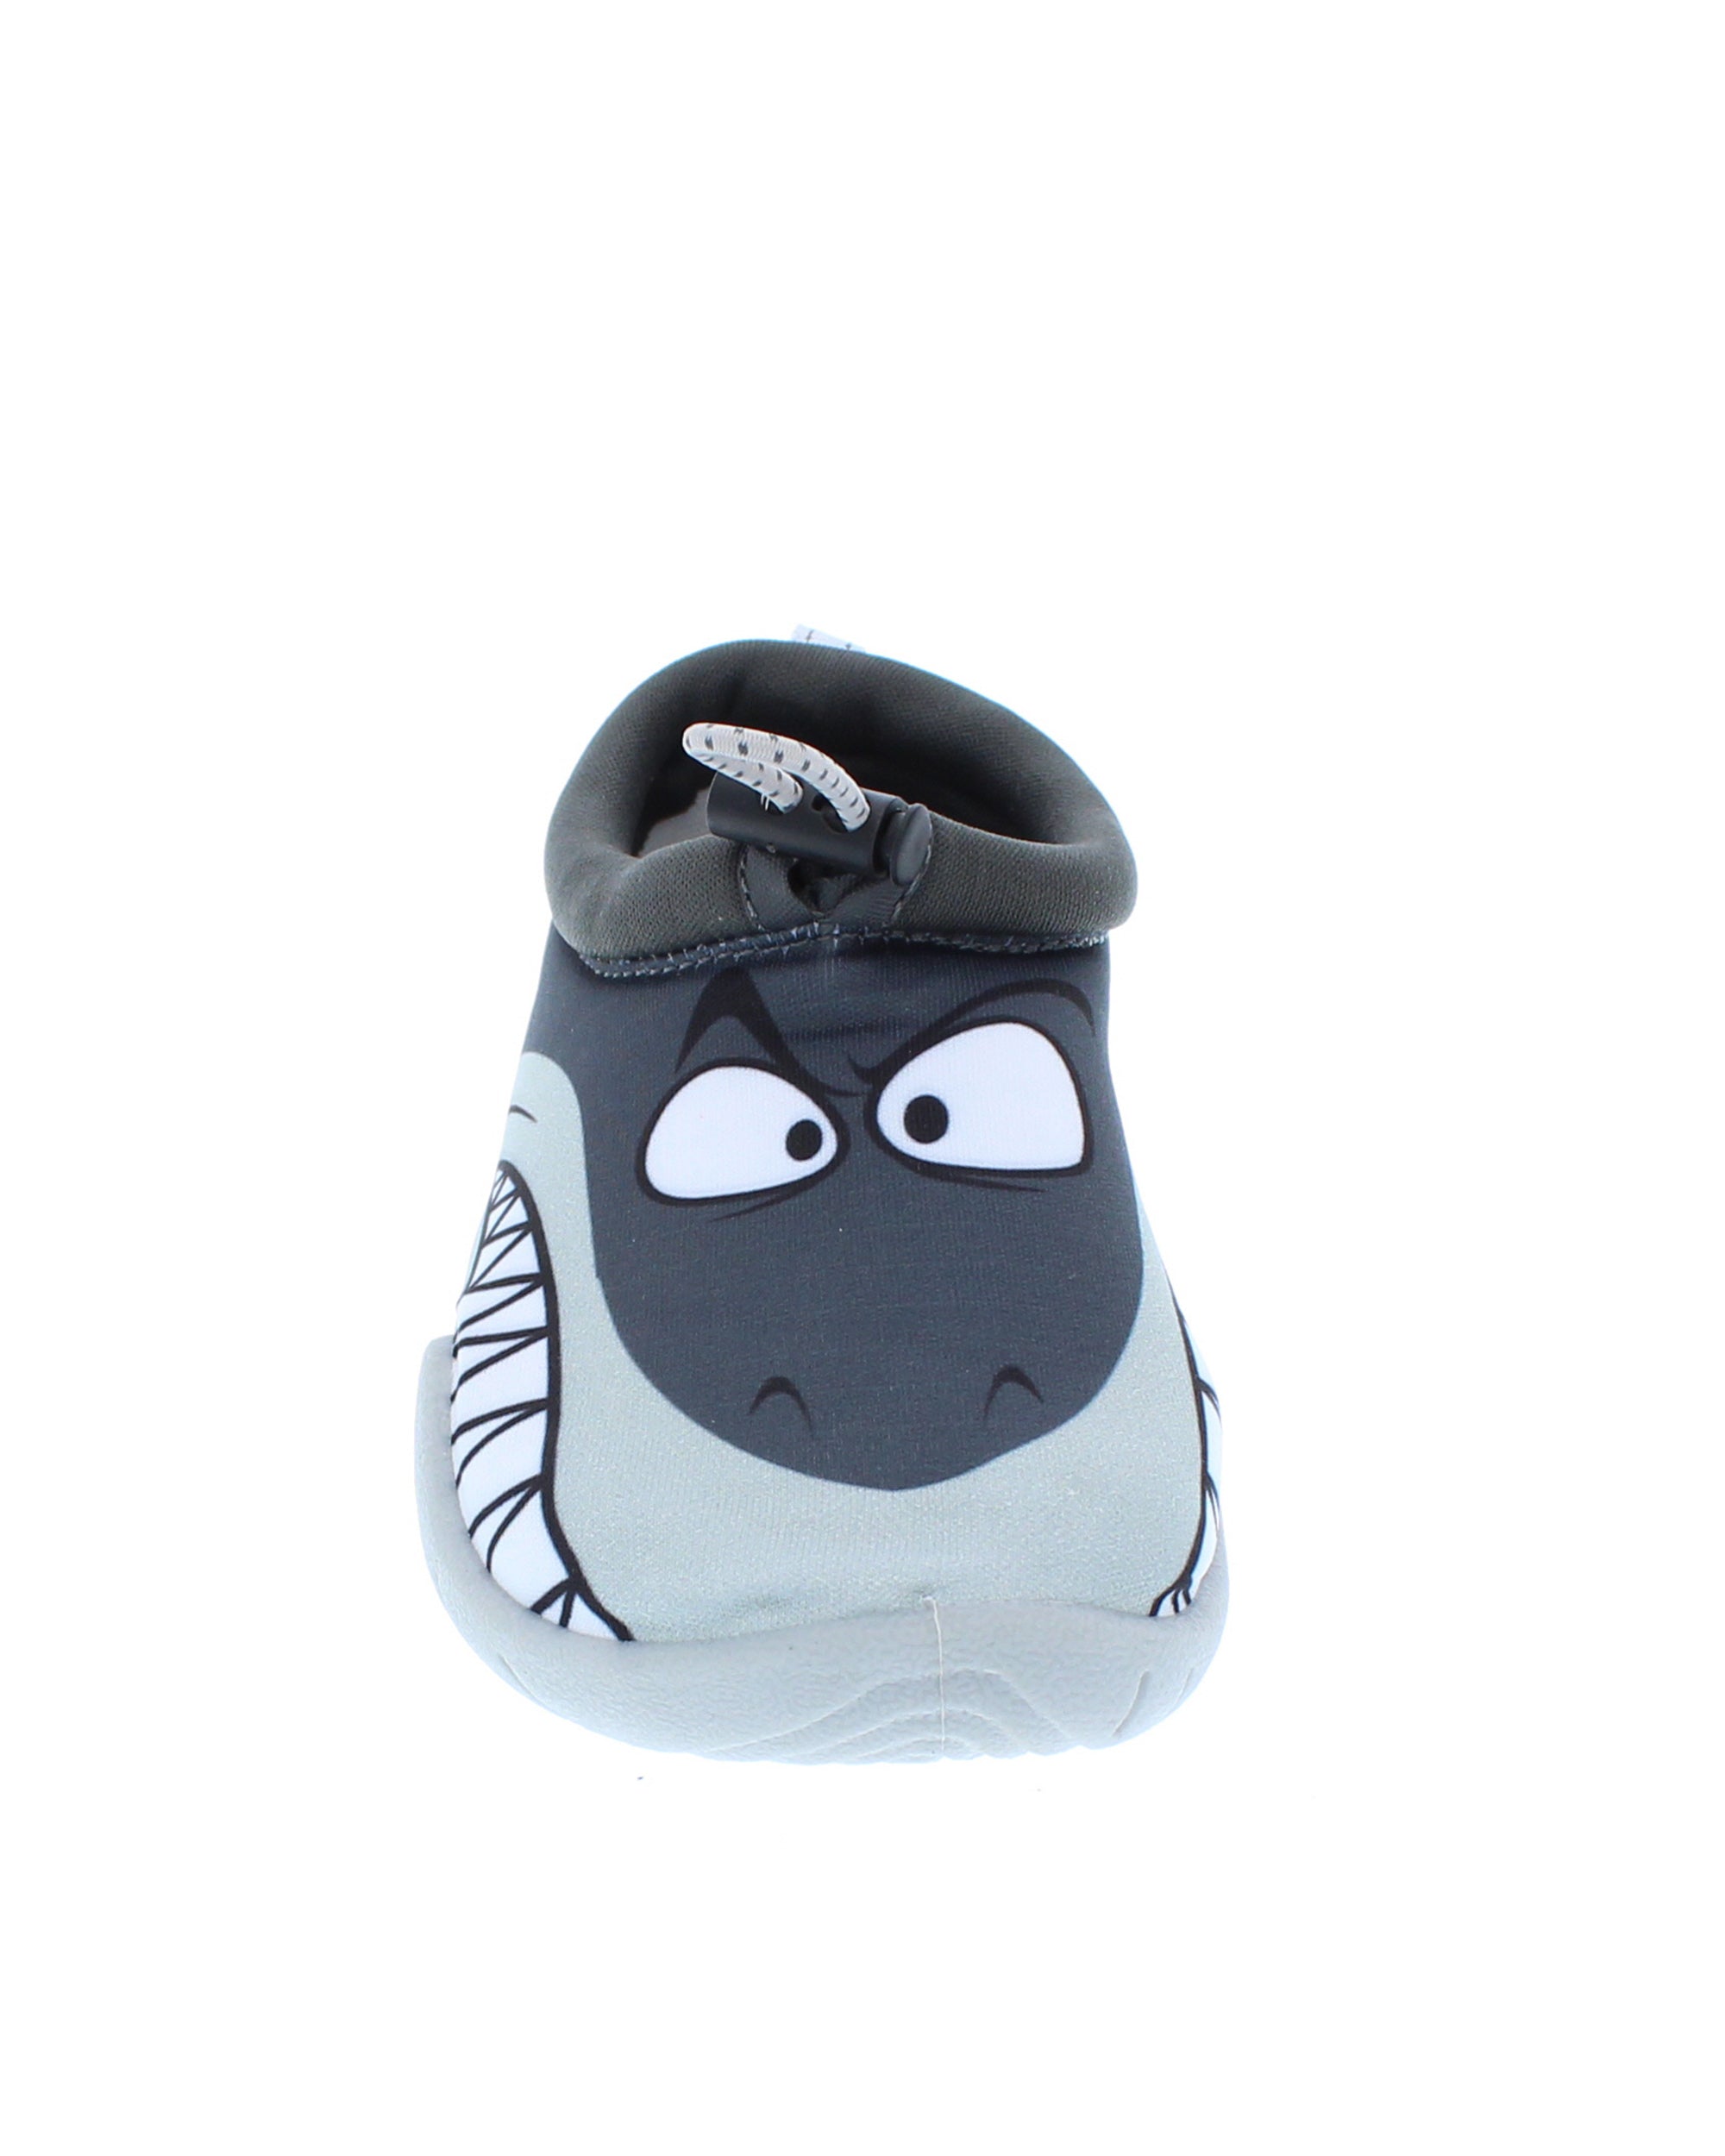 shark shoes for toddlers